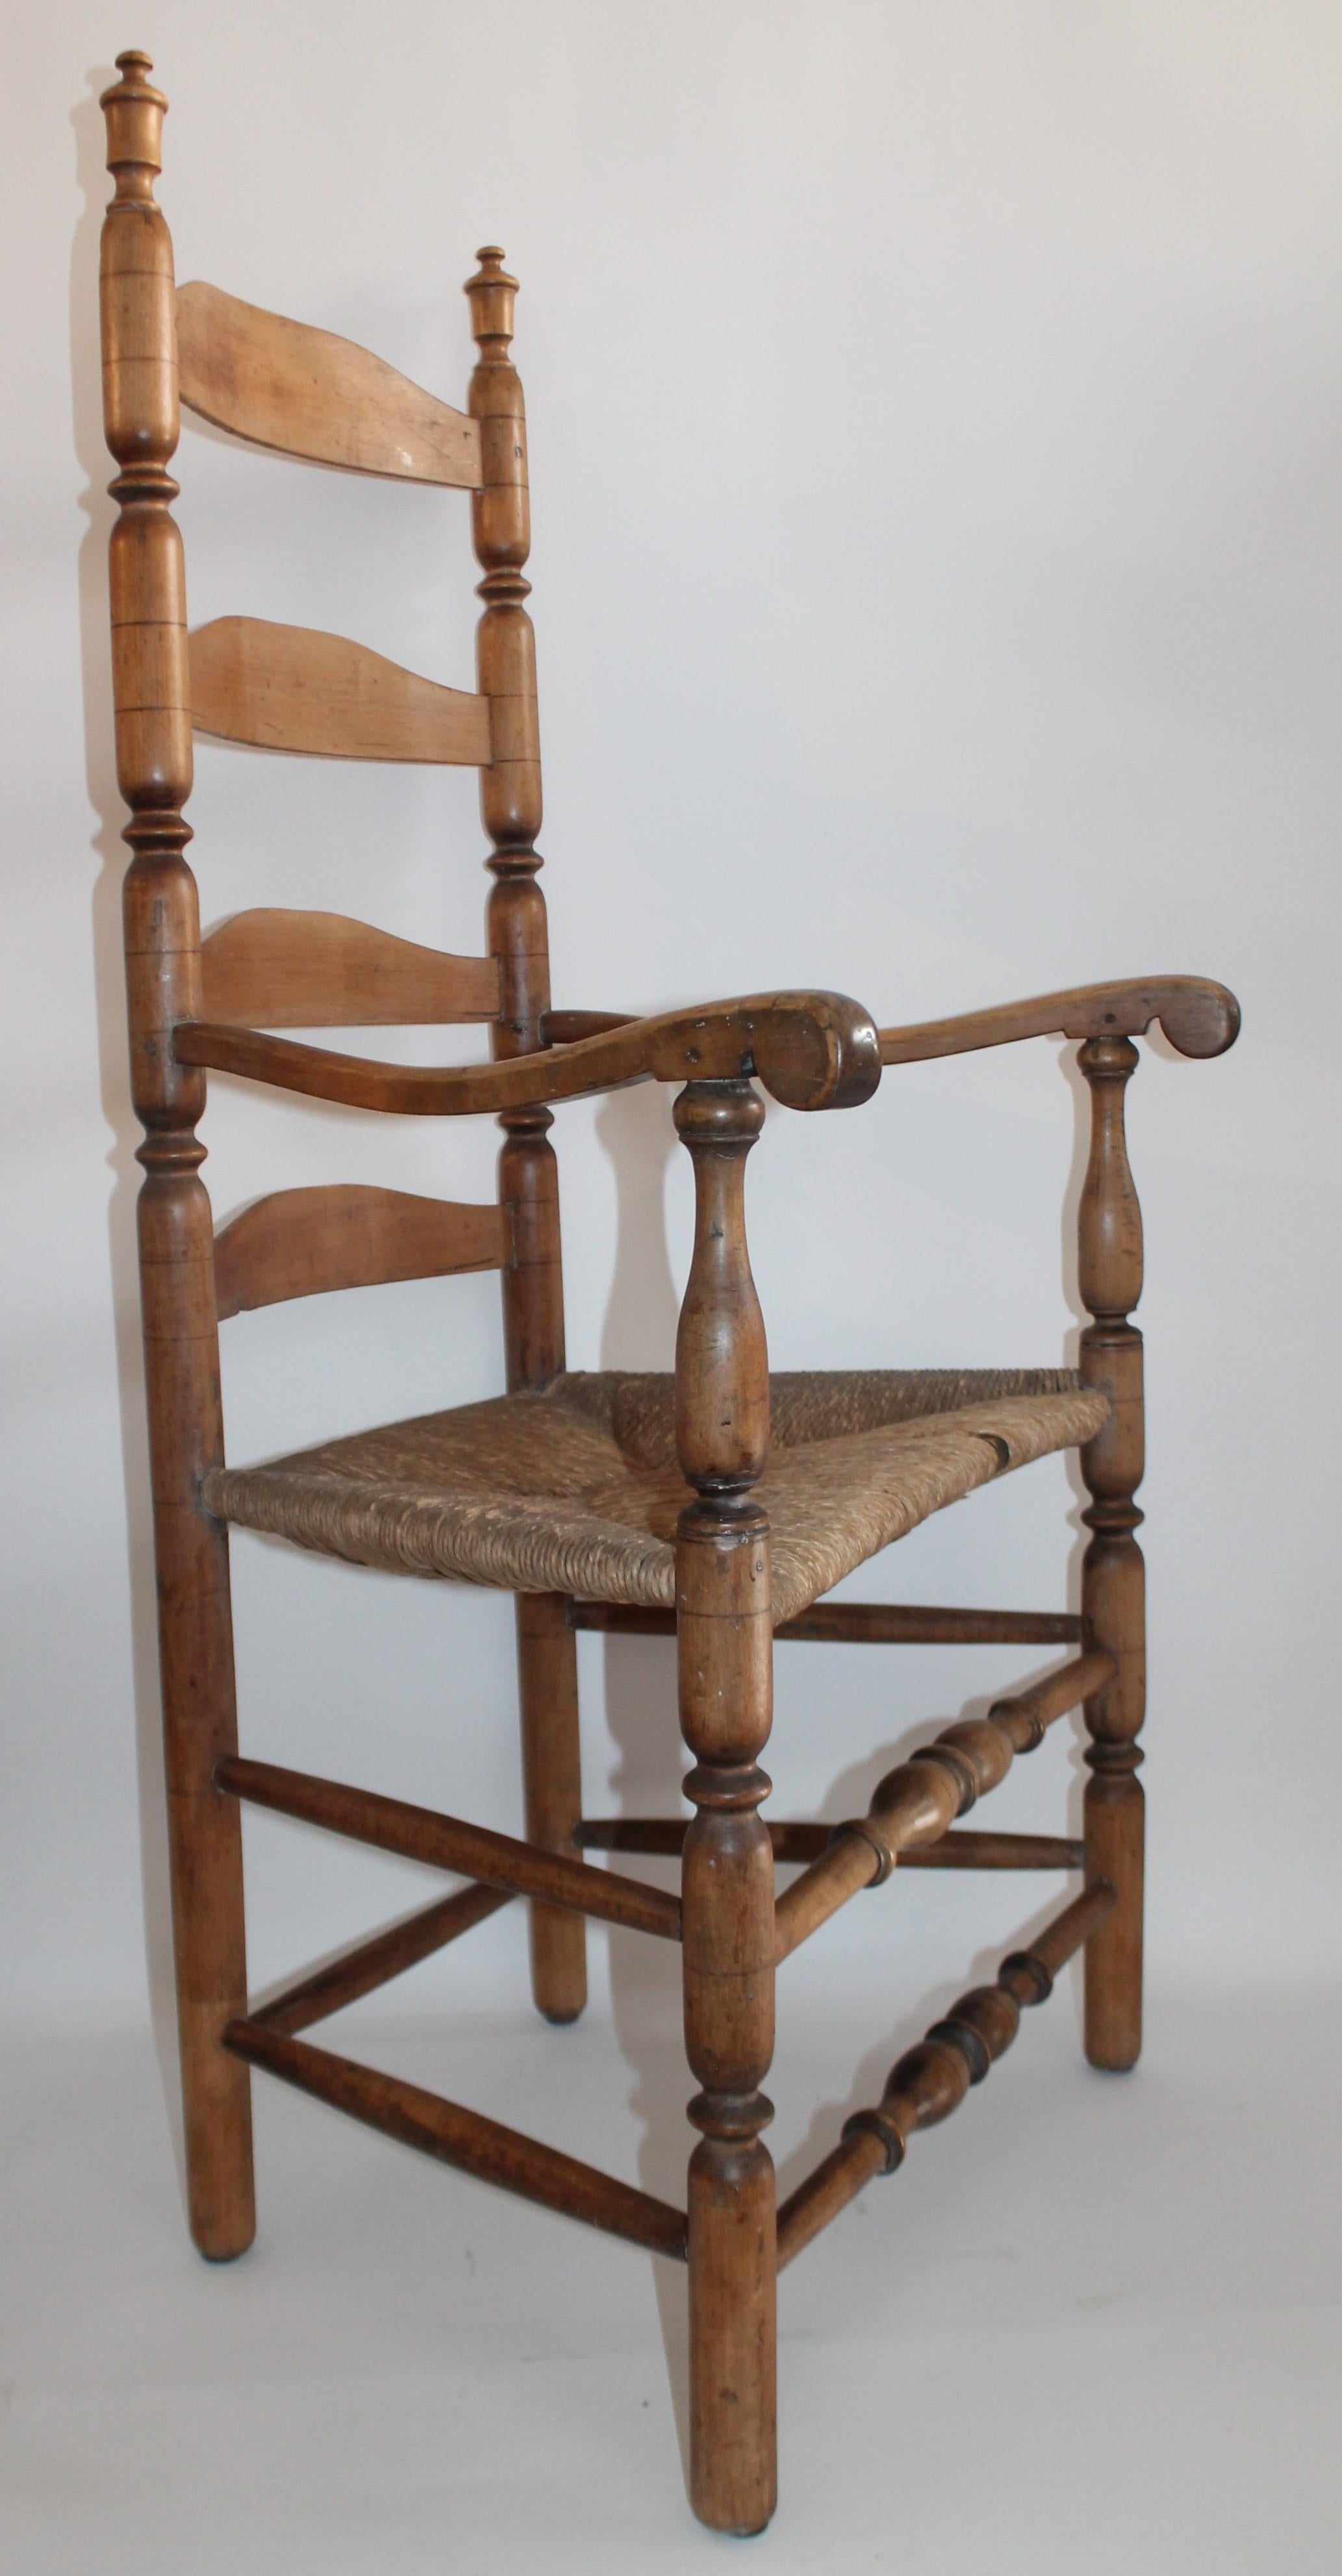 18th century New England Ladder back armchair with original rush seat. Fantastic undisturbed surface with worn arms. Super comfortable and in nice condition. Great western look with Navajo Indian weaving's. All hand carved turnings.